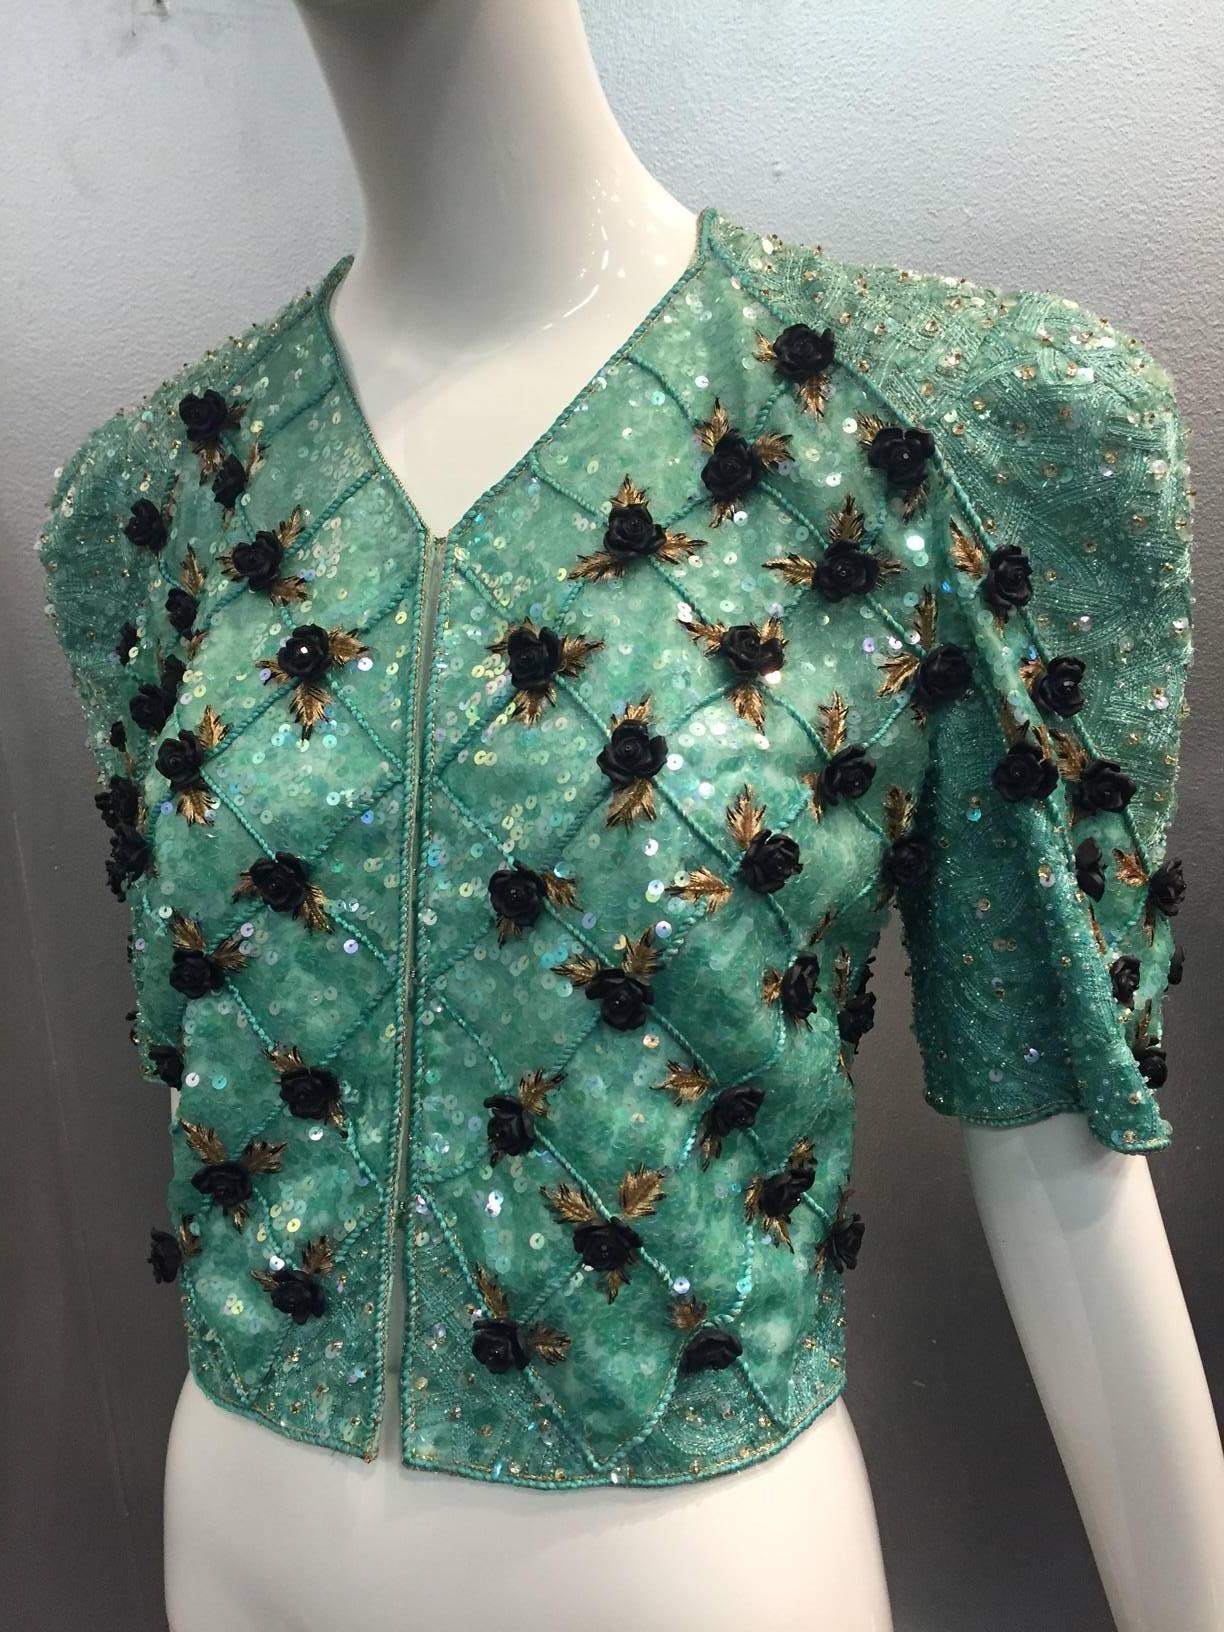 A gorgeous 1980s Carolina Herrera sea foam aqua blue/green intricately bead and sequin encrusted bolero jacket with front hook closure and exaggerated shoulder treatment.  Scattered across the piece, in a trellis pattern, are black resin roses and